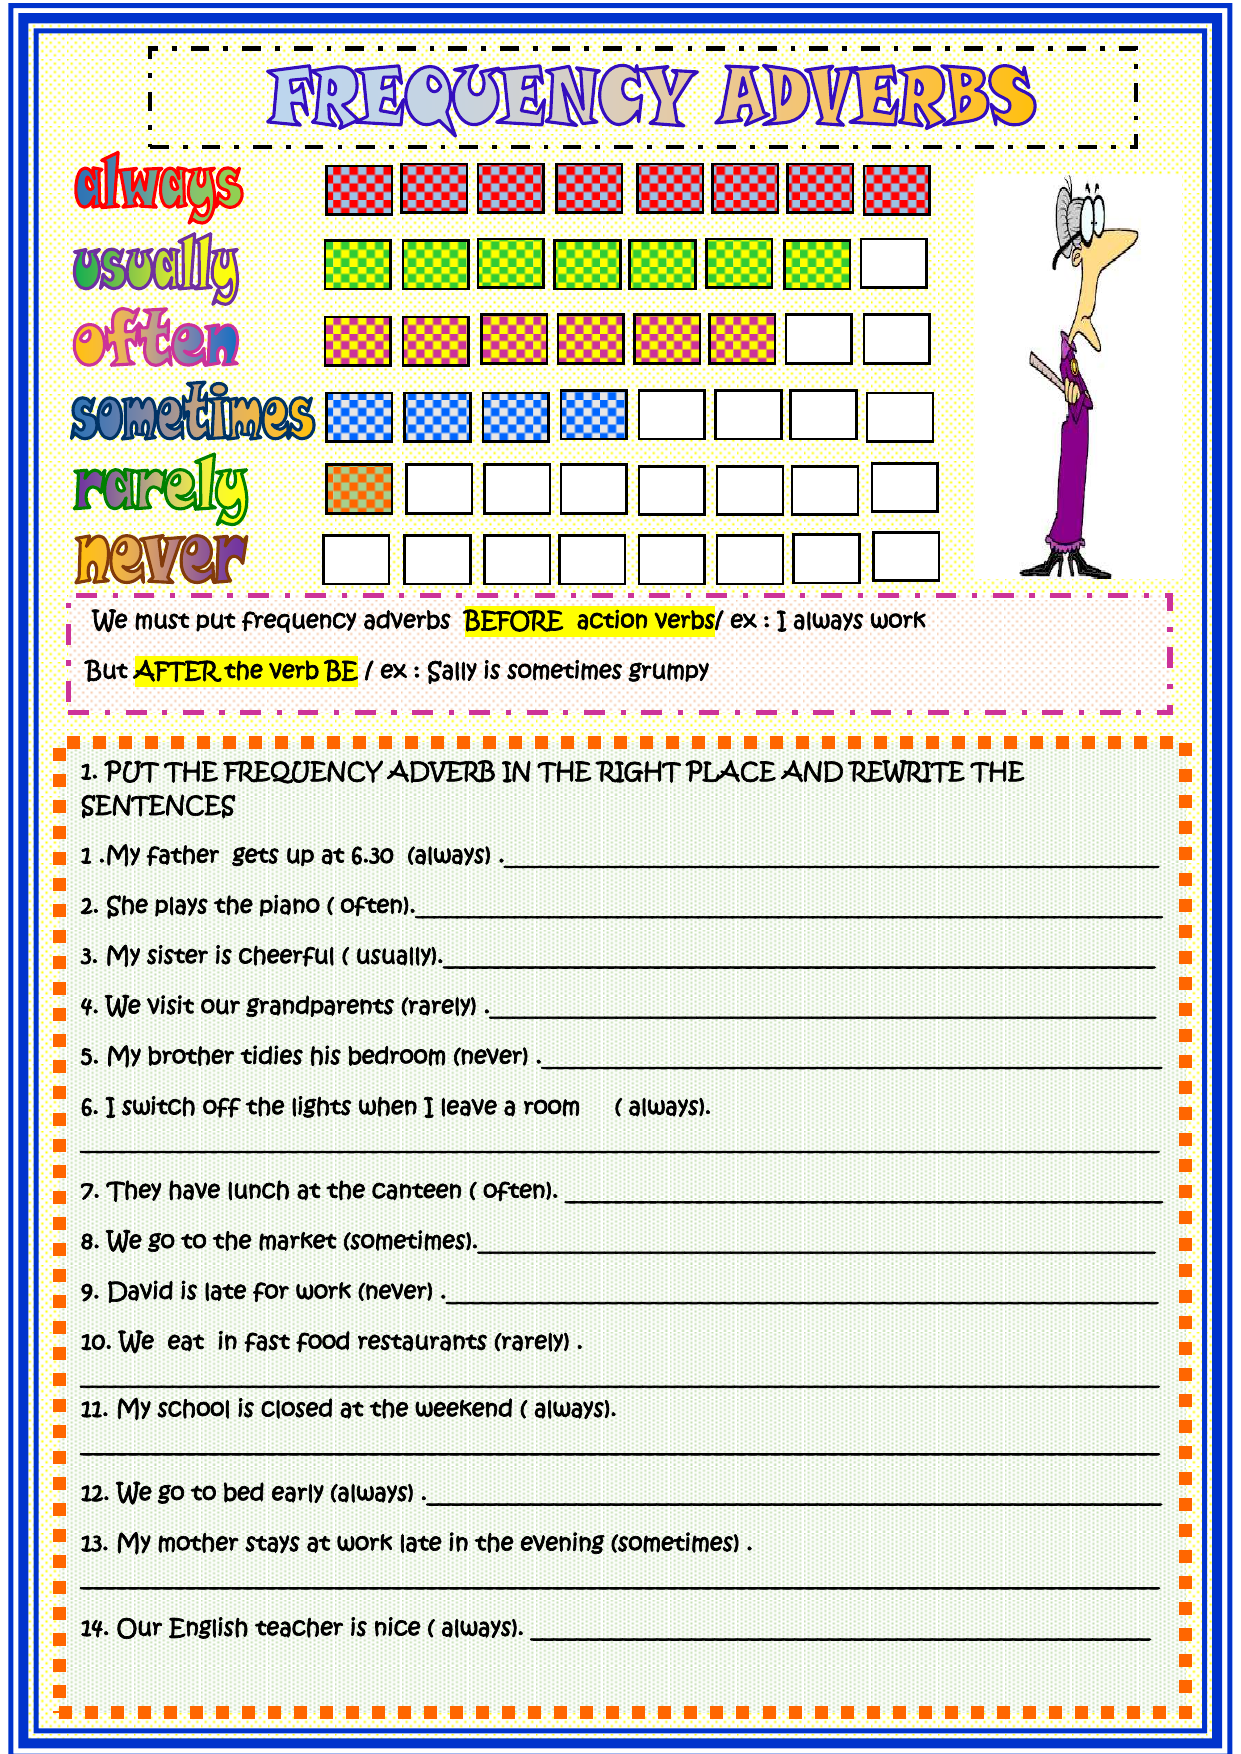 Frequency adverbs 2 page activity grammar drills 94673